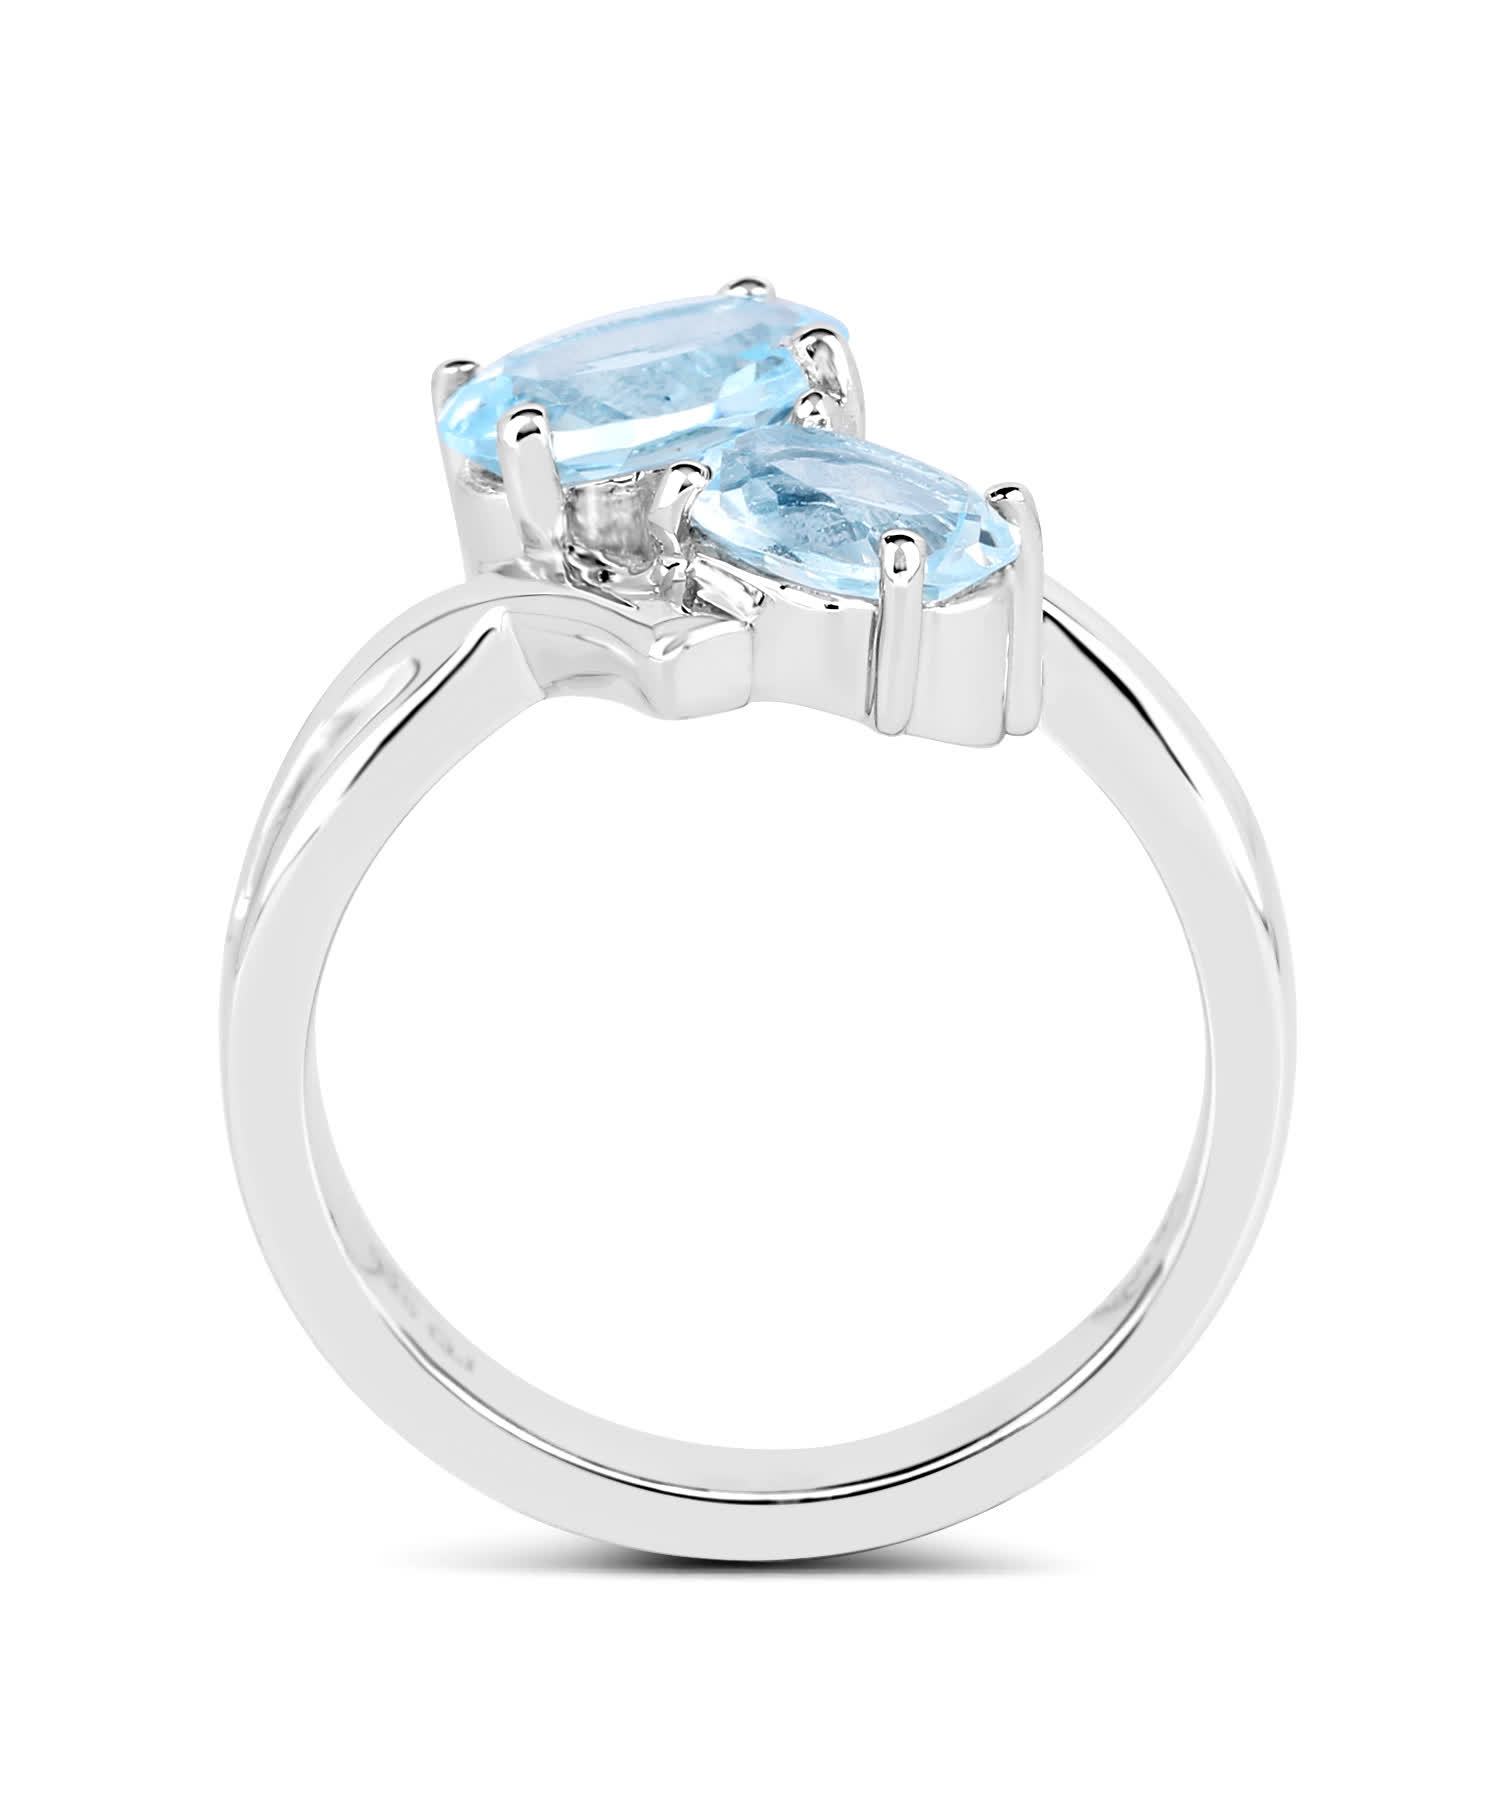 2.55ctw Natural Sky Blue Topaz Rhodium Plated 925 Sterling Silver Two-Stone Ring View 2